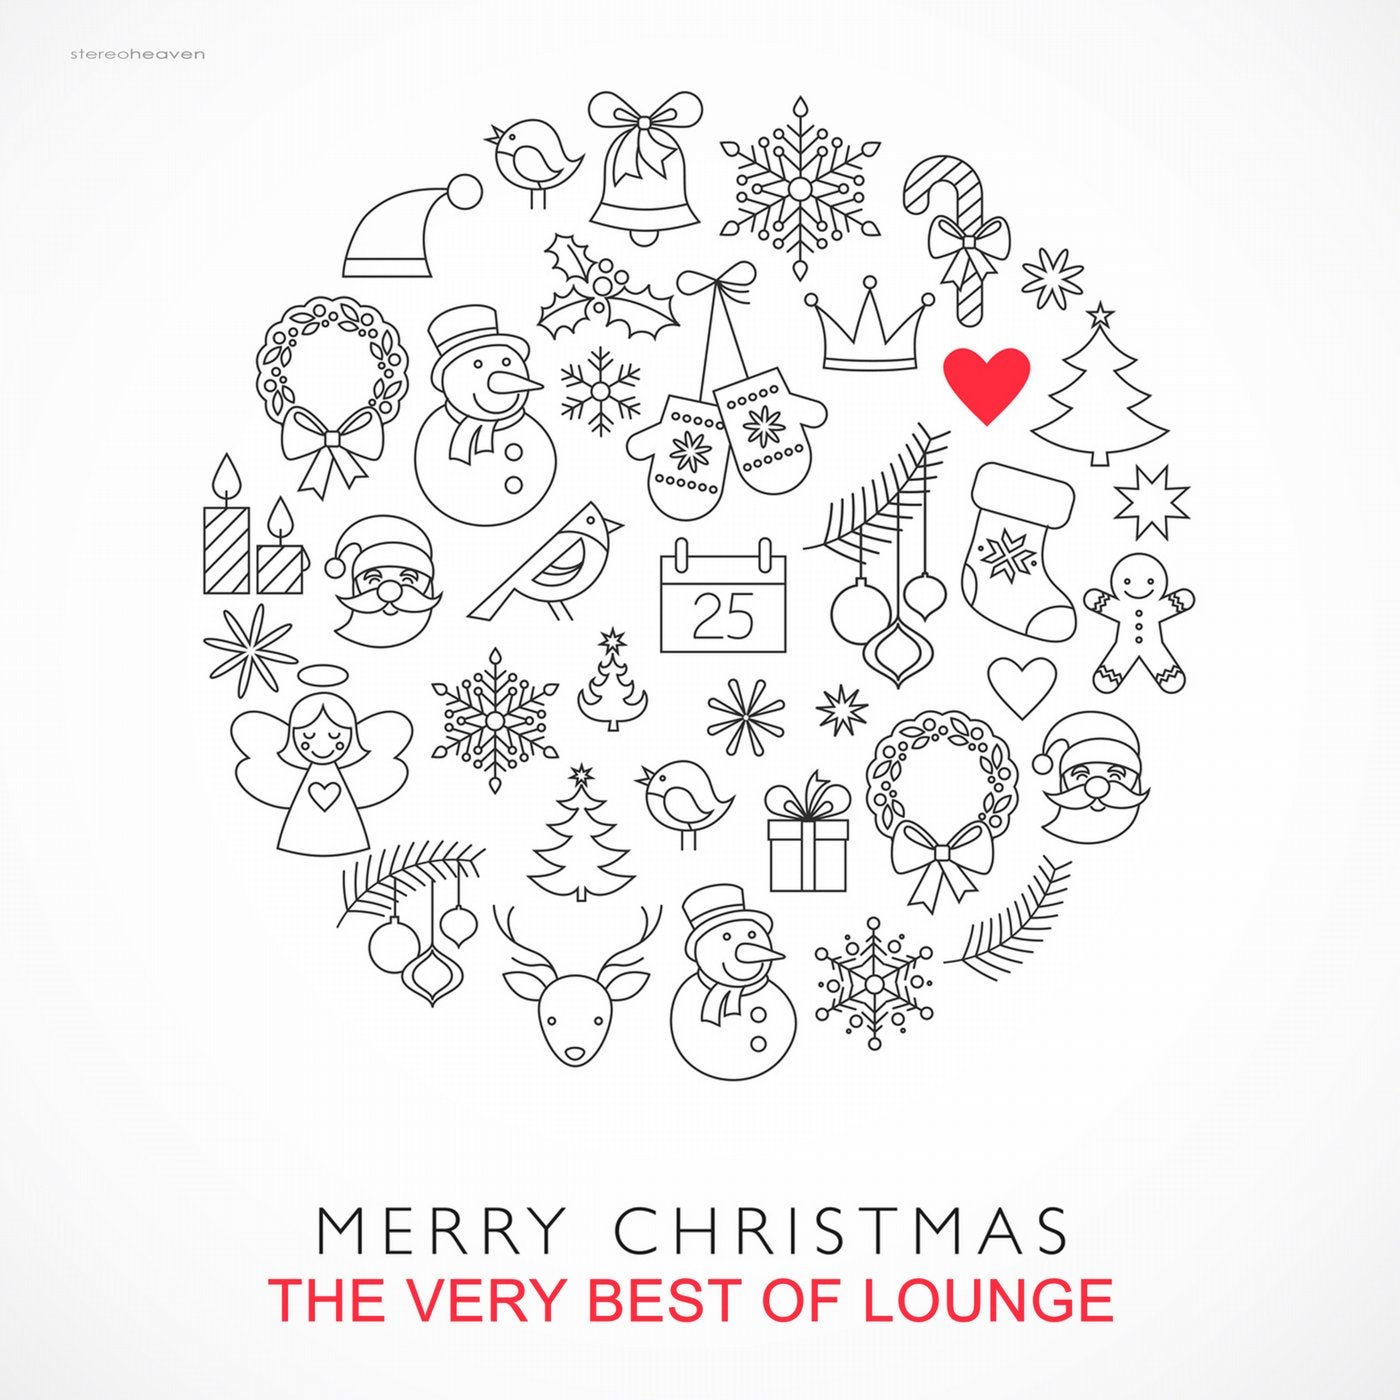 Merry Christmas - The Very Best of Lounge